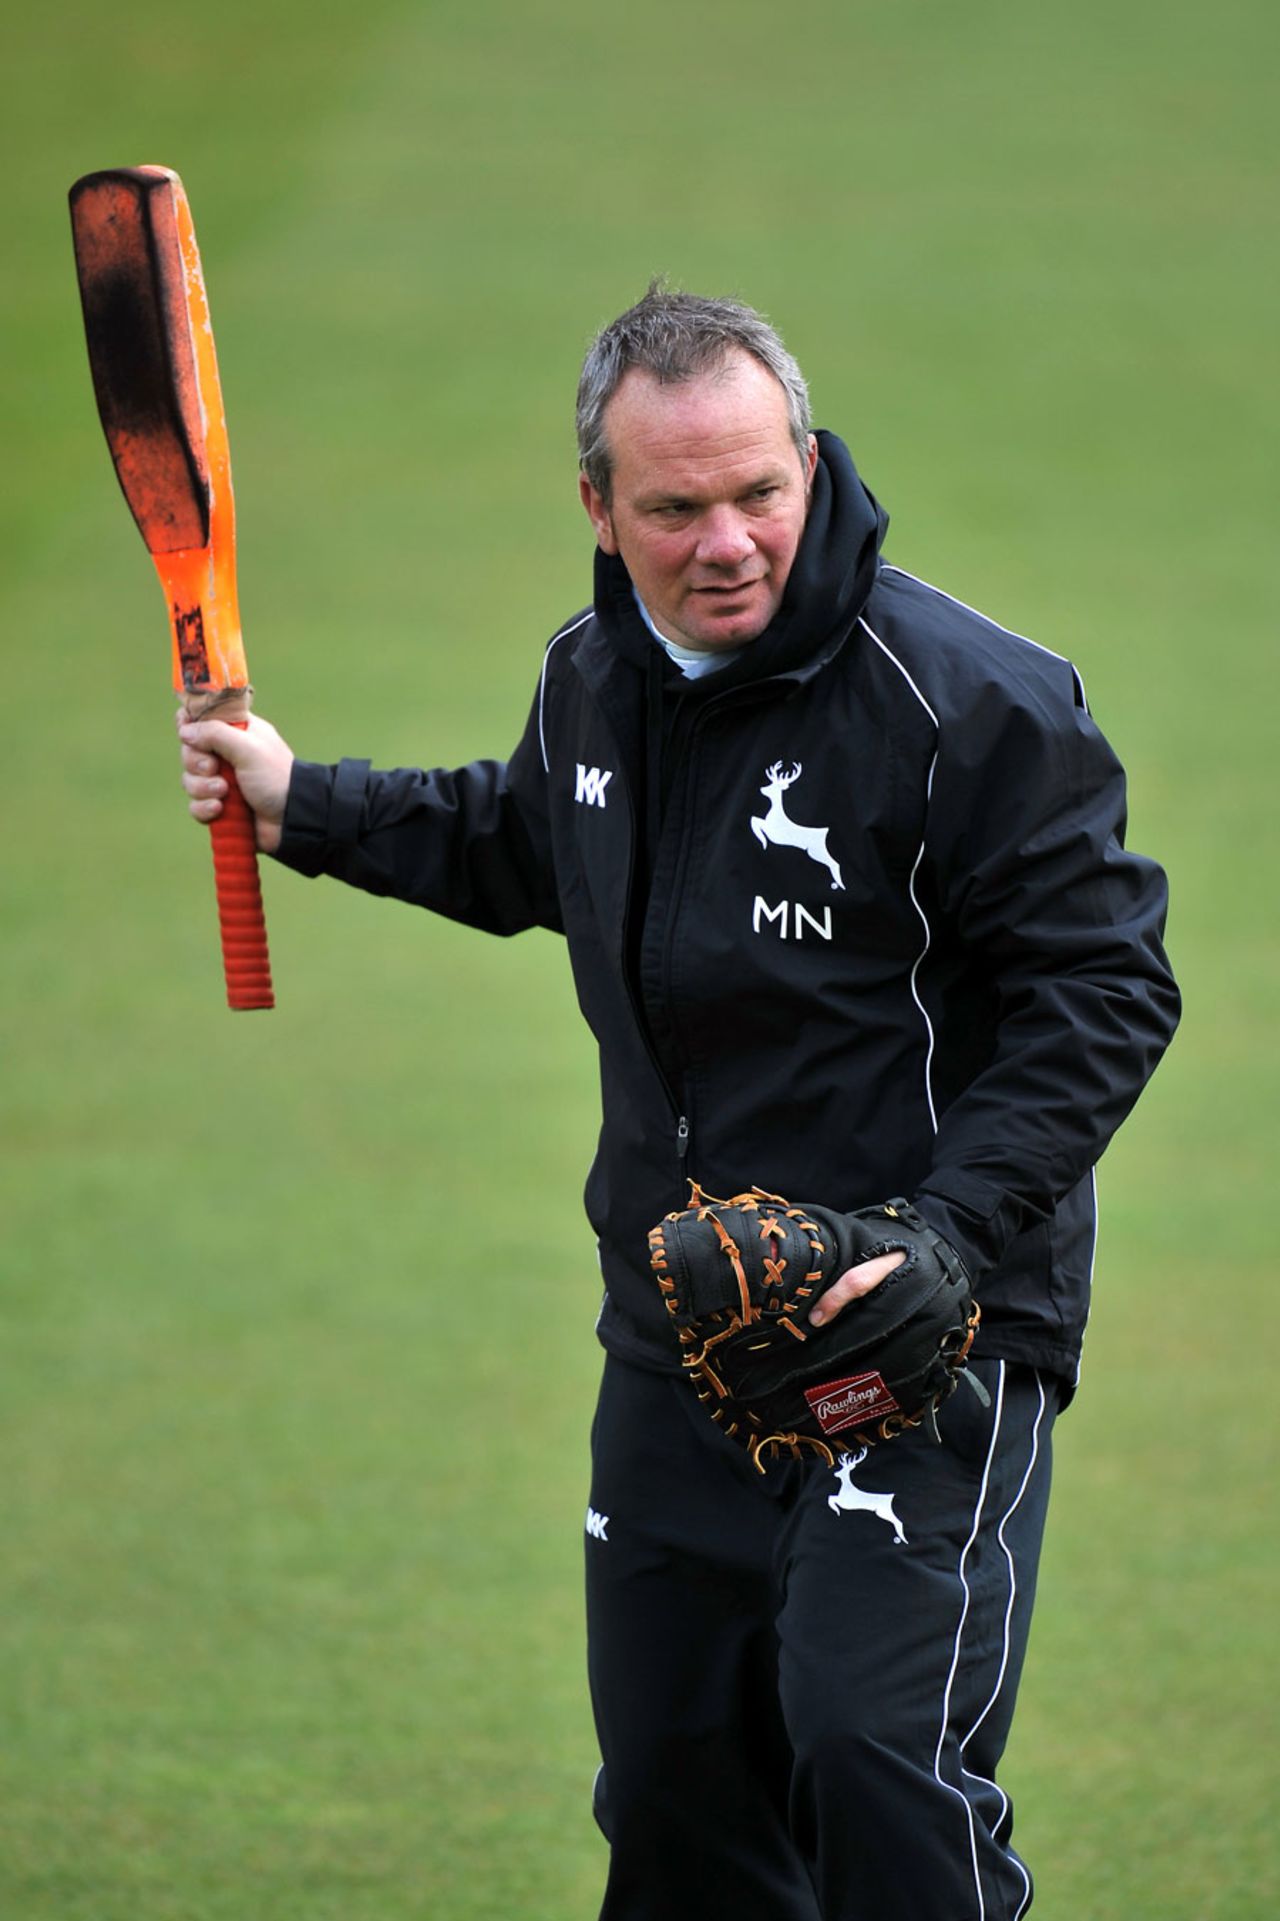 Notts coach Mick Newell before play, Nottinghamshire v Somerset, County Championship, Division One, Trent Bridge, April 19, 2012